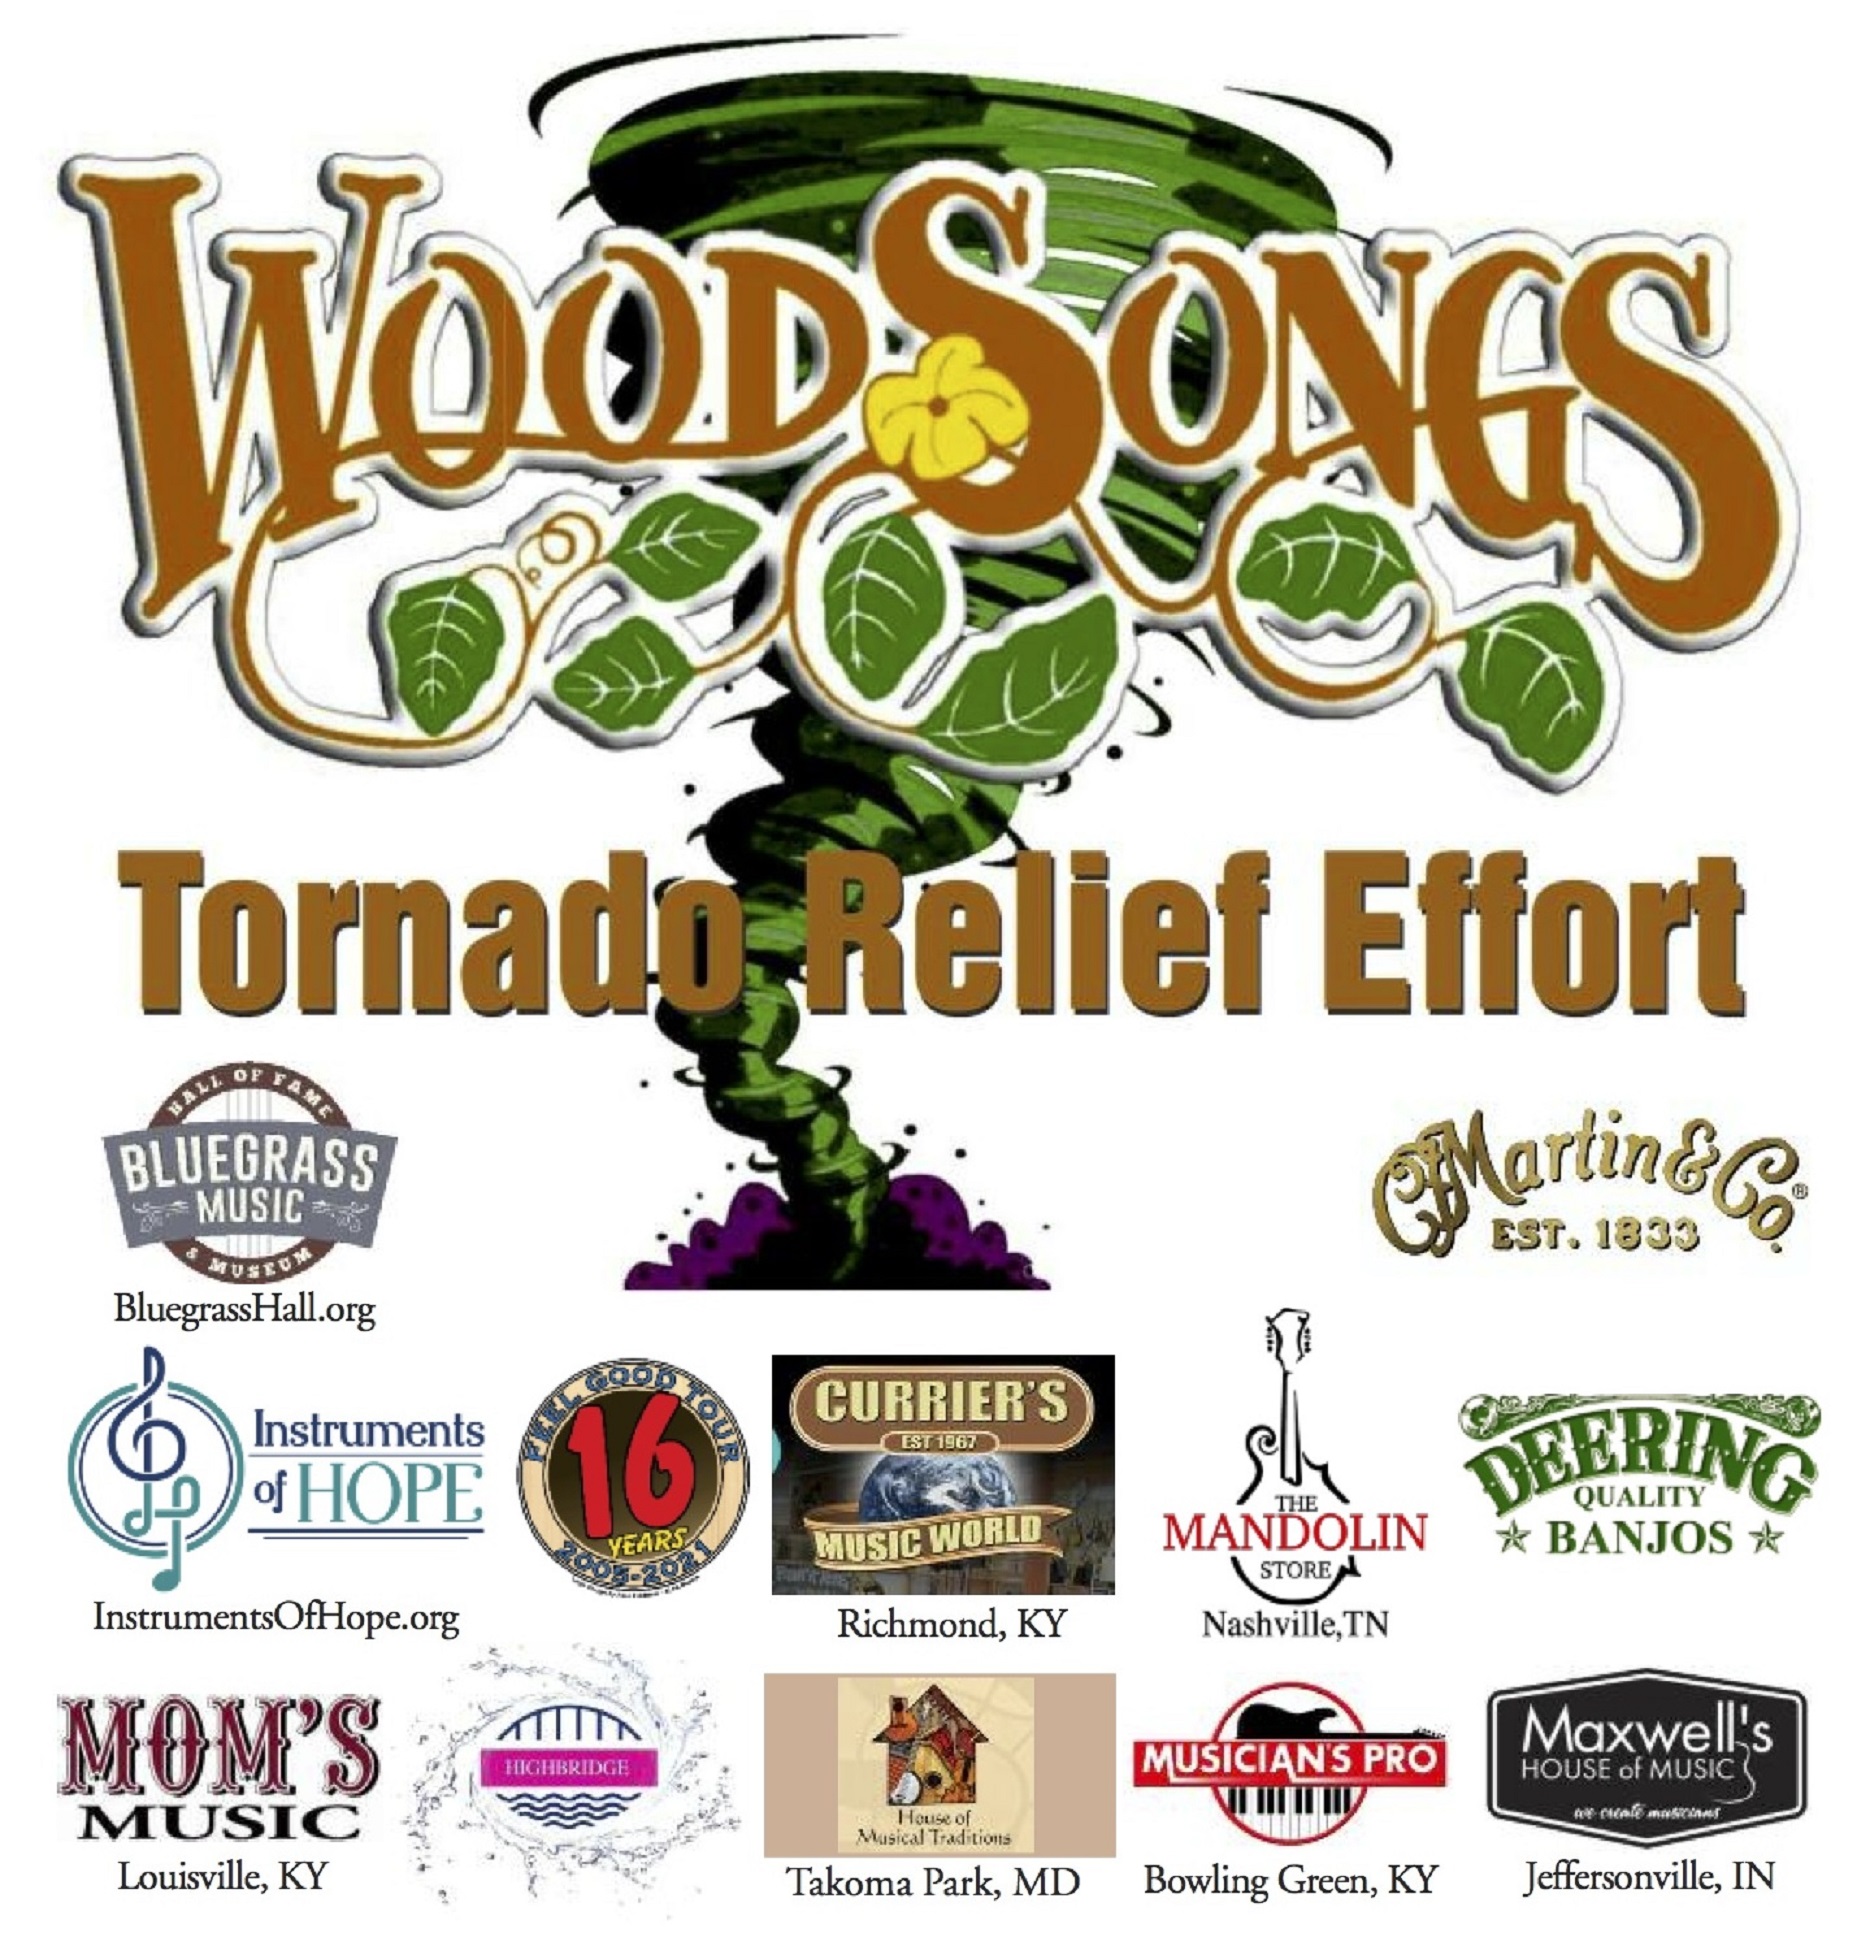 WoodSongs Tornado Relief Effort Announces Free Instrument Distribution Dates & Locations For Tornado Victims